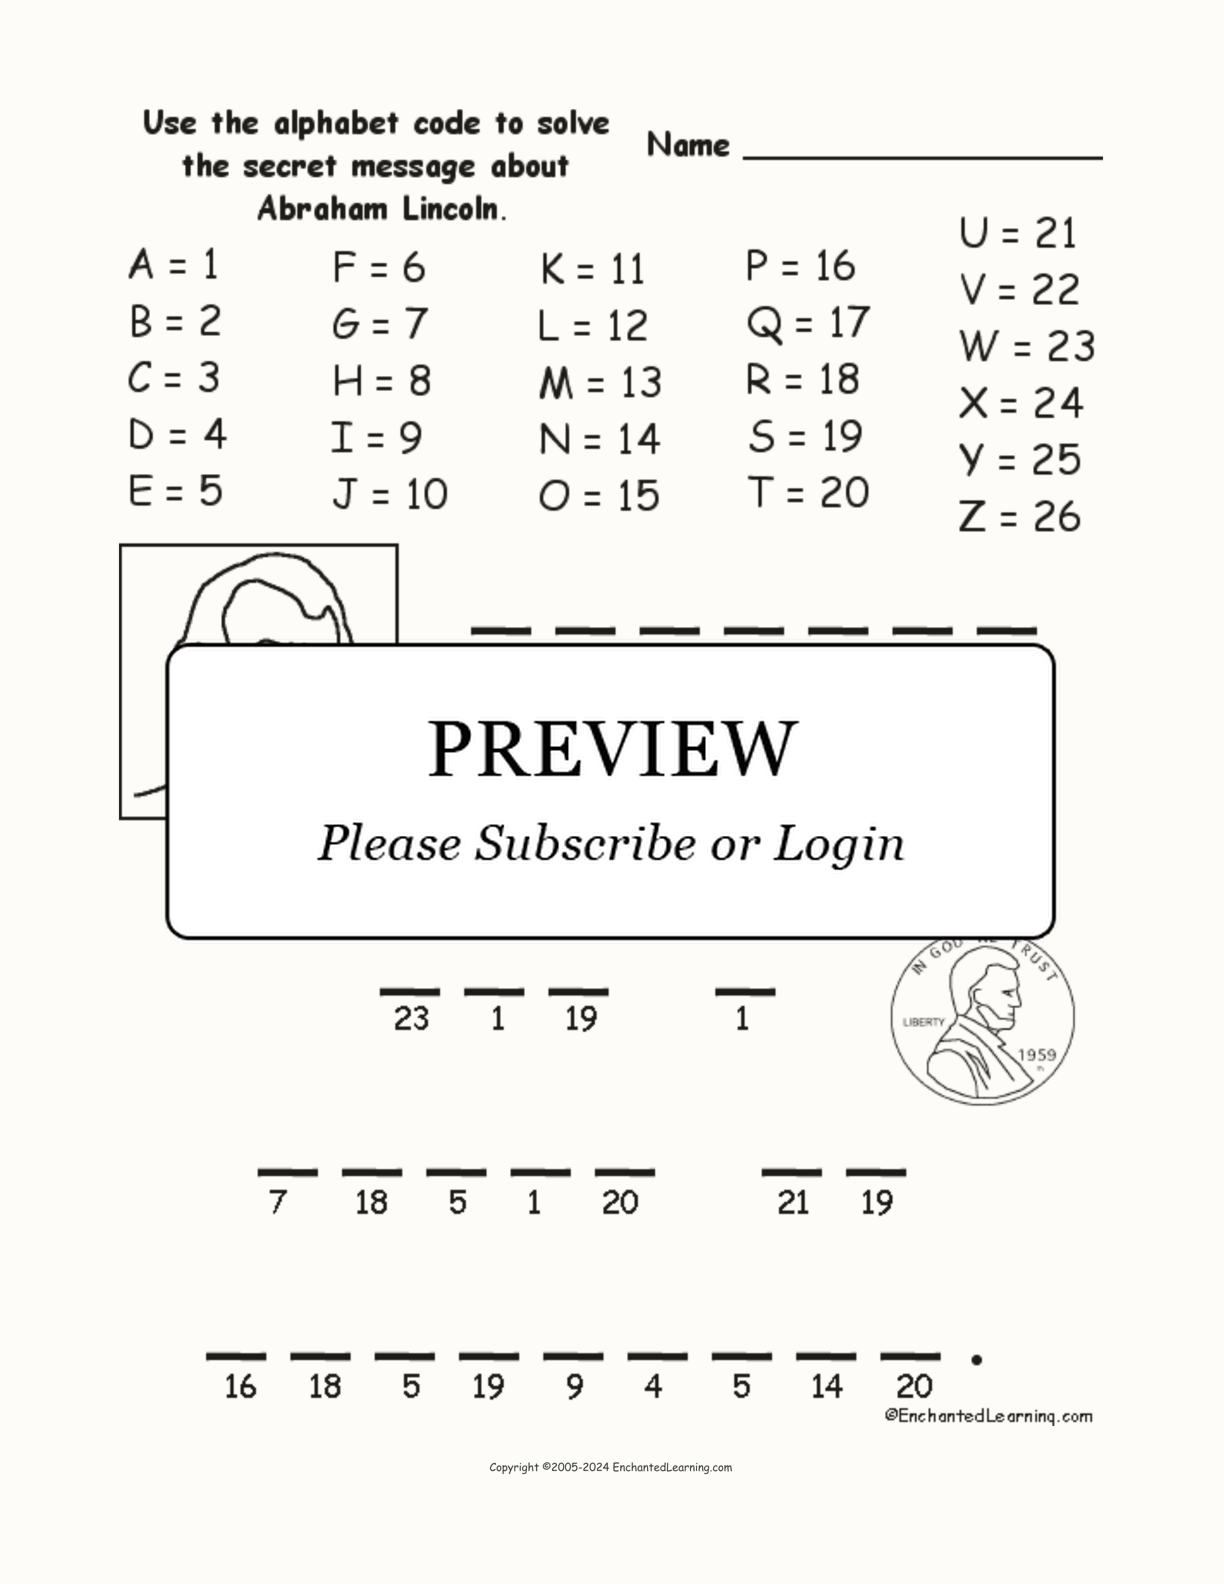 Abraham Lincoln Alphabet Code interactive worksheet page 1